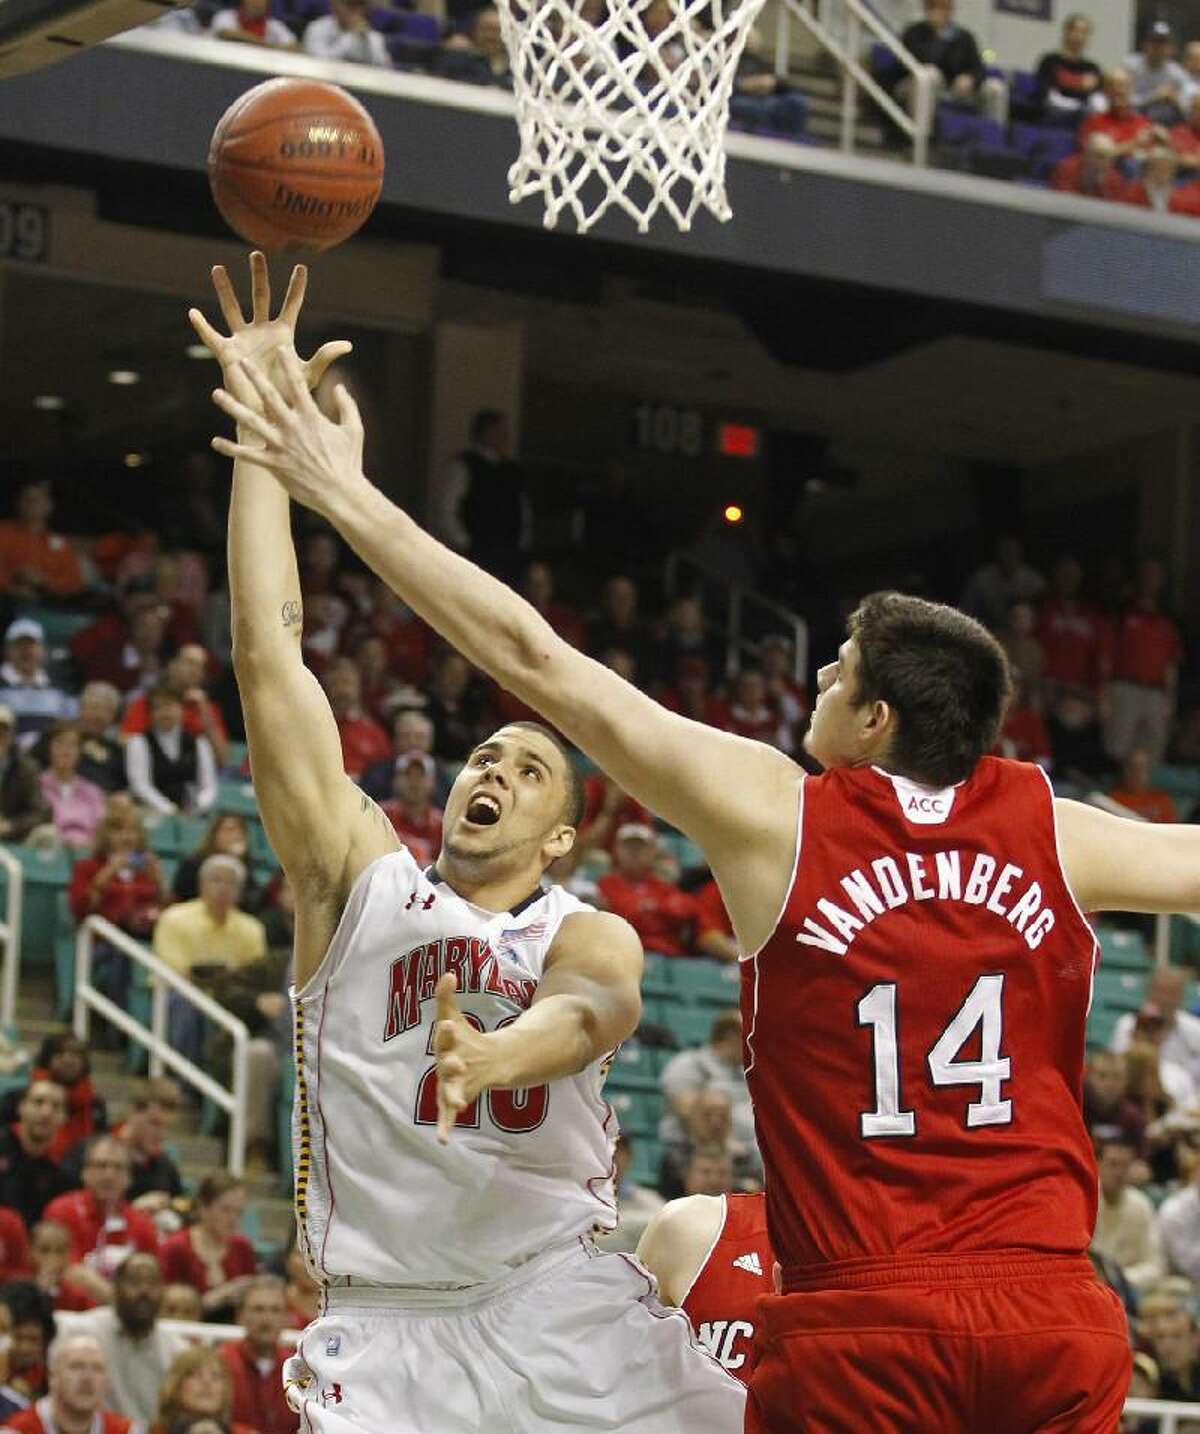 ASSOCIATED PRESS FILE PHOTO Maryland's Jordan Williams (20) shoots over North Carolina State's Jordan Vandenberg (14) in the first half of an Atlantic Coast Conference tournament game in Greensboro, N.C., on March 10. Williams was taken in the second round by the New Jersey Nets with the 36th pick.